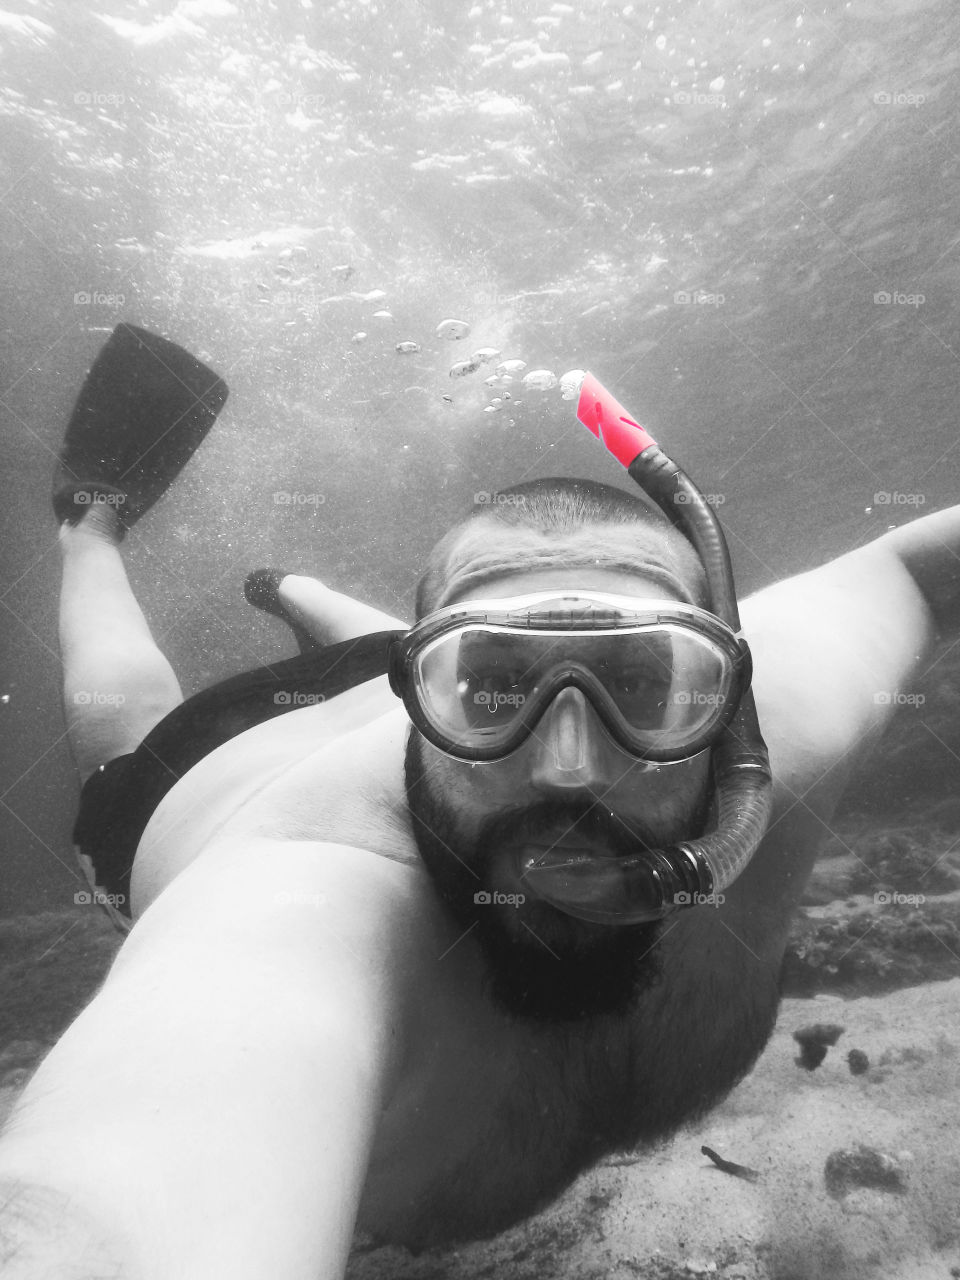 snorkling monochrome. snorkling underwater in monochrome with selective color red